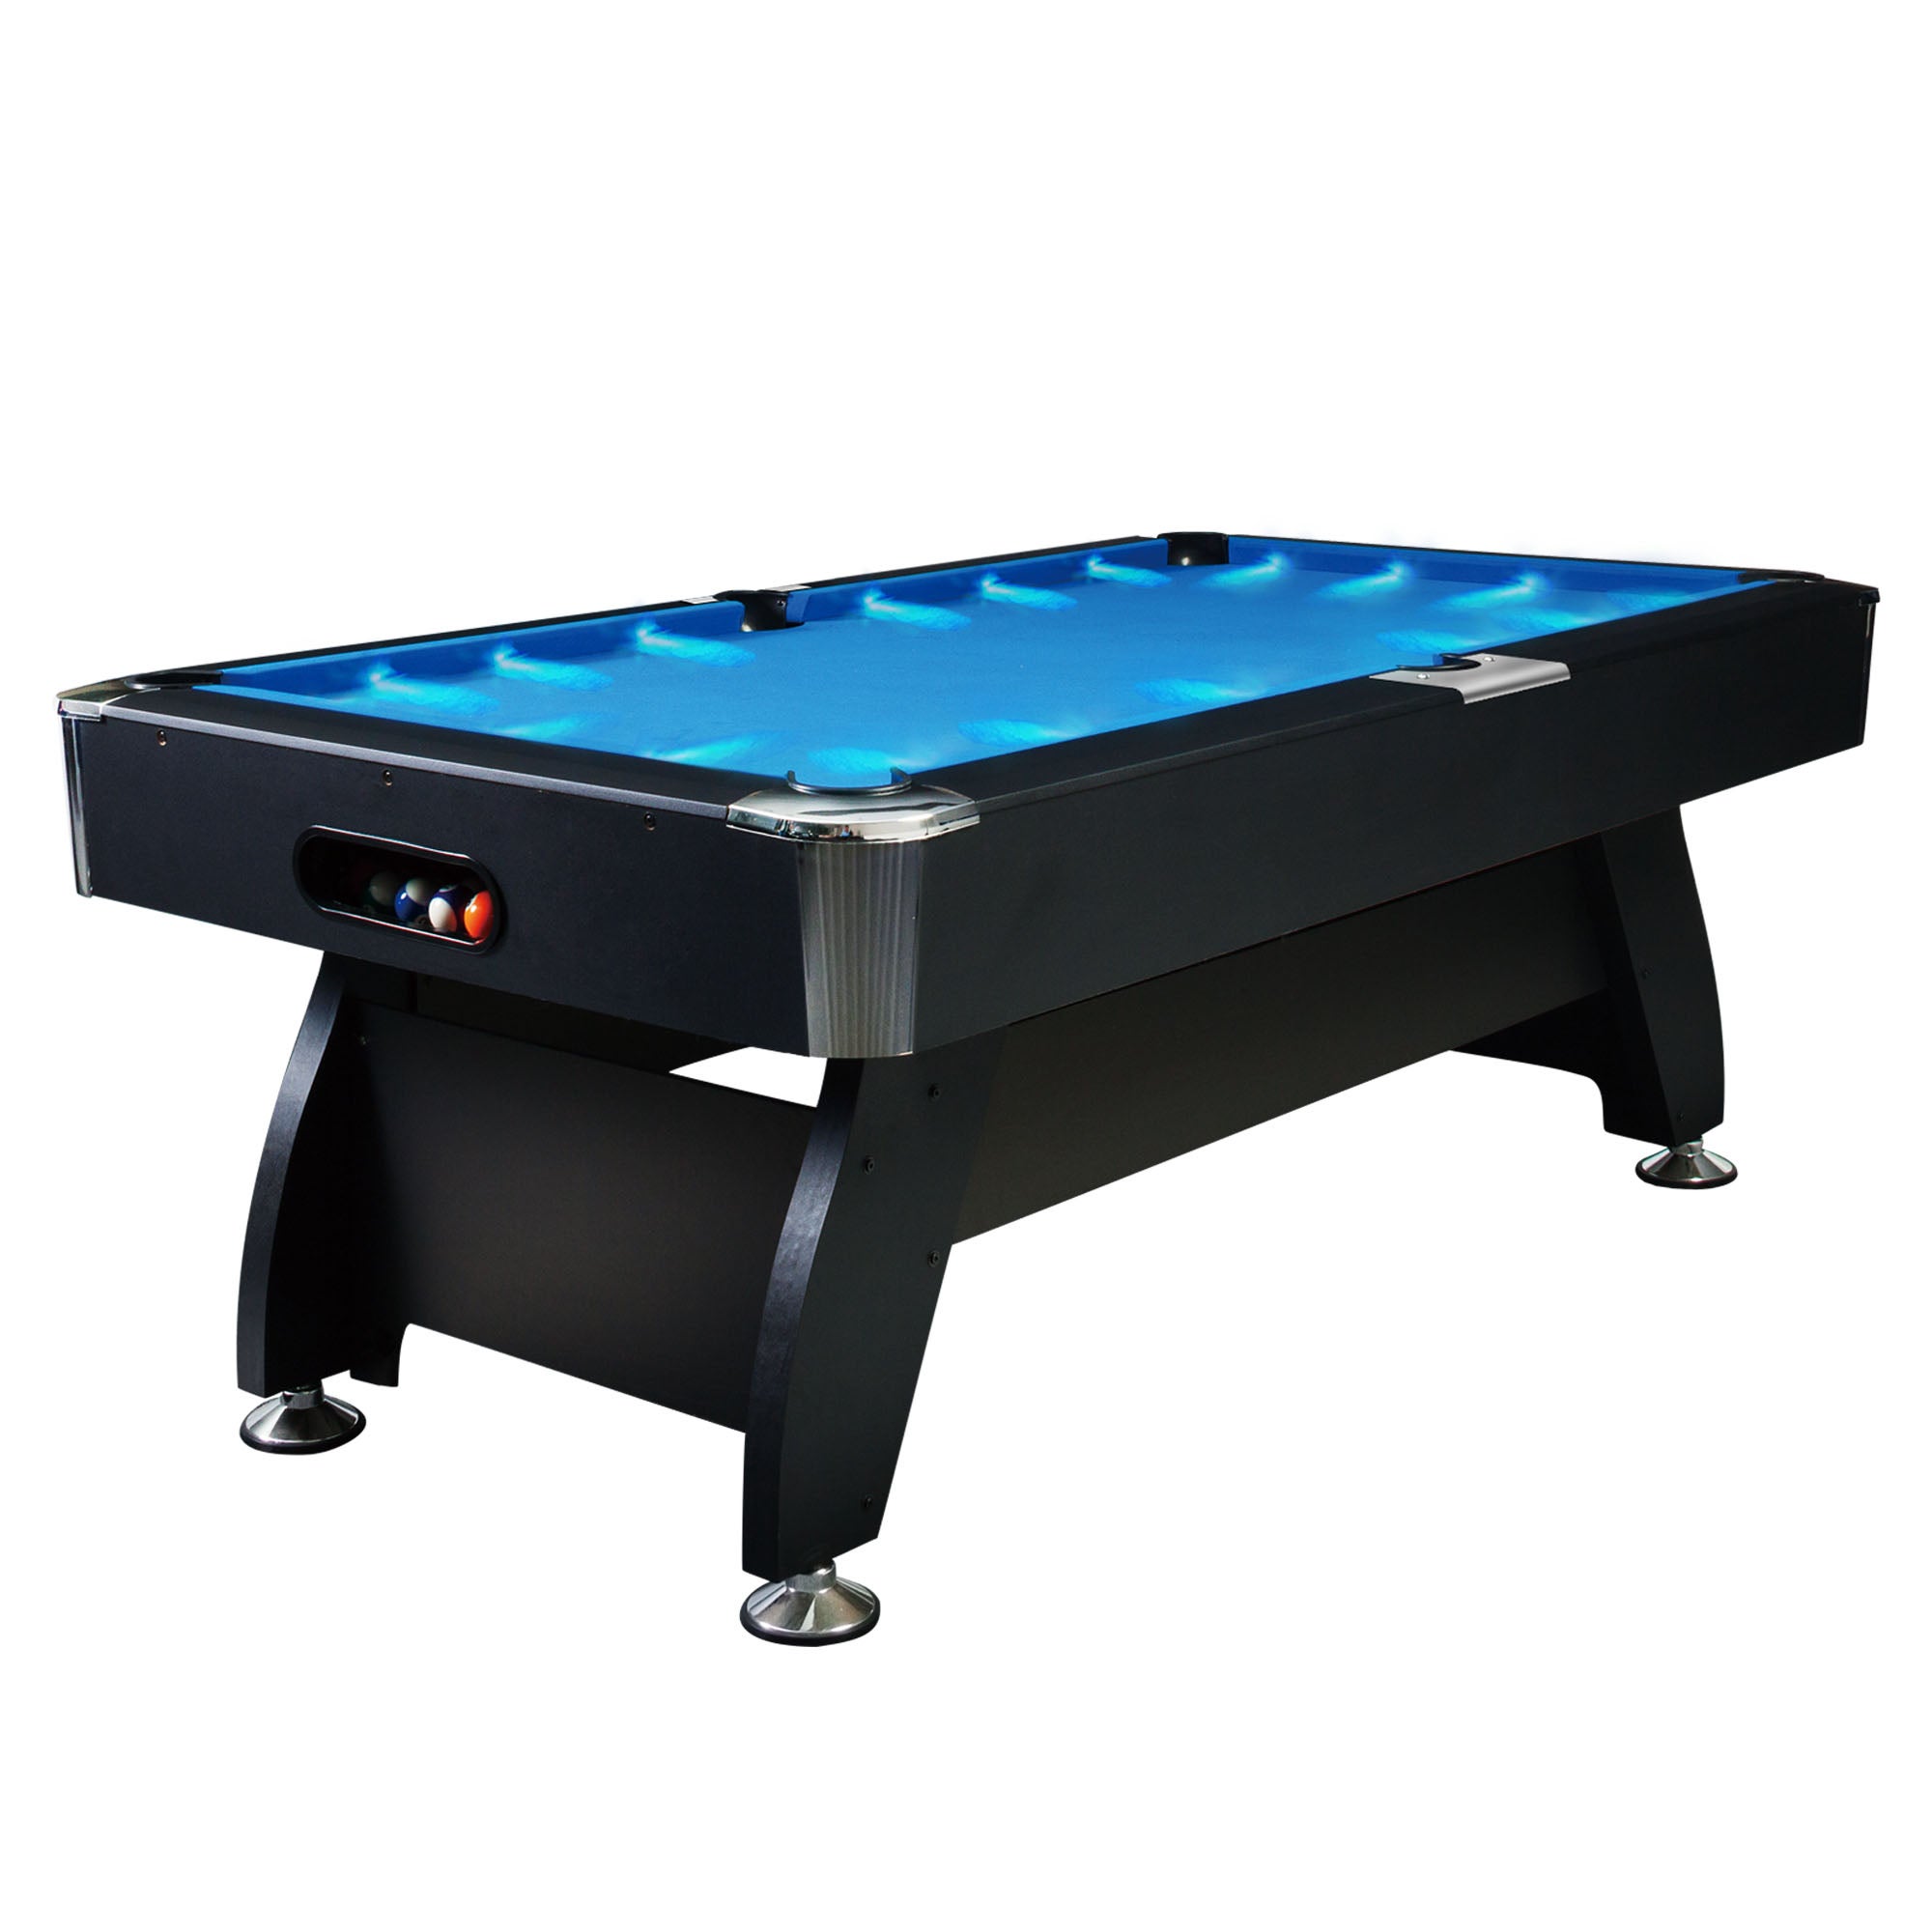 T&R SPORTS 8FT LED MDF Billiard Table with Free Accessories Pool / Snooker Table - Black&Blue